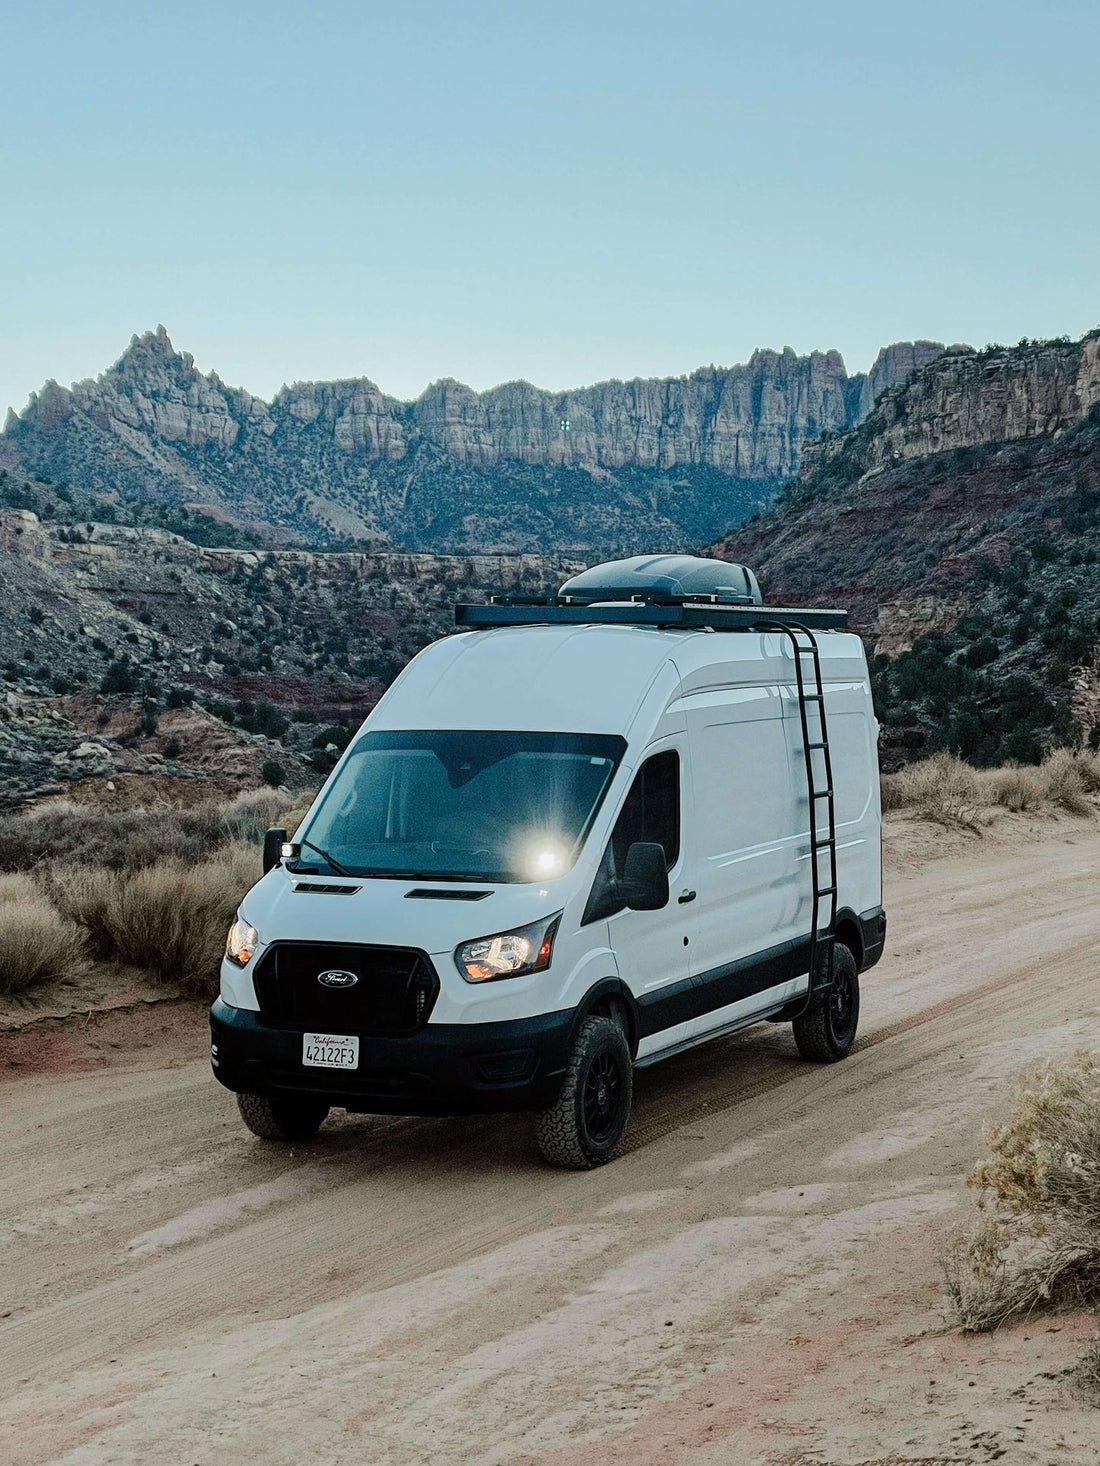 Is a Ford Transit good for van conversion?